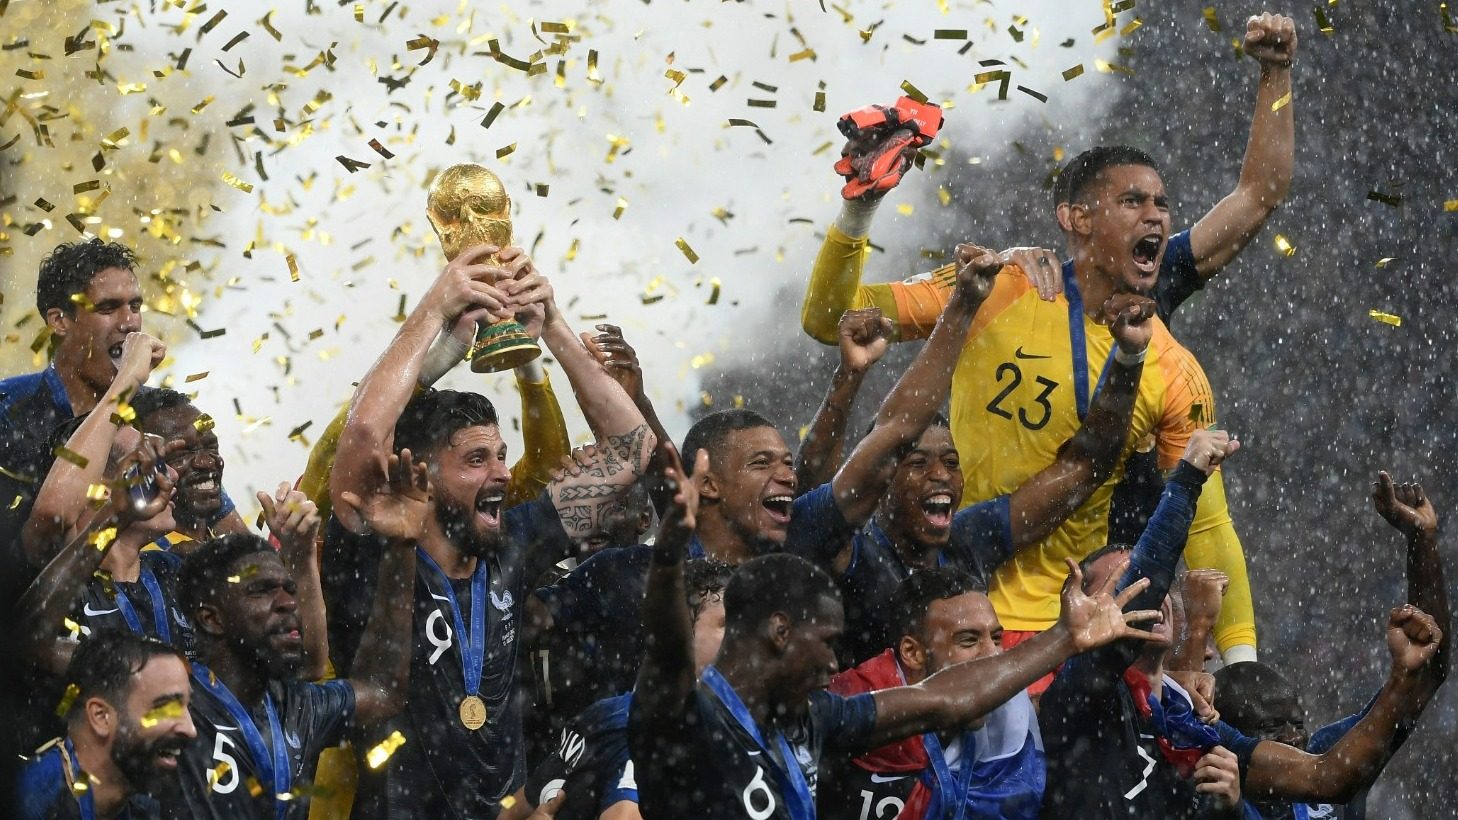 FIFA World Cup Winners List - WC winners from 1930 to 2018